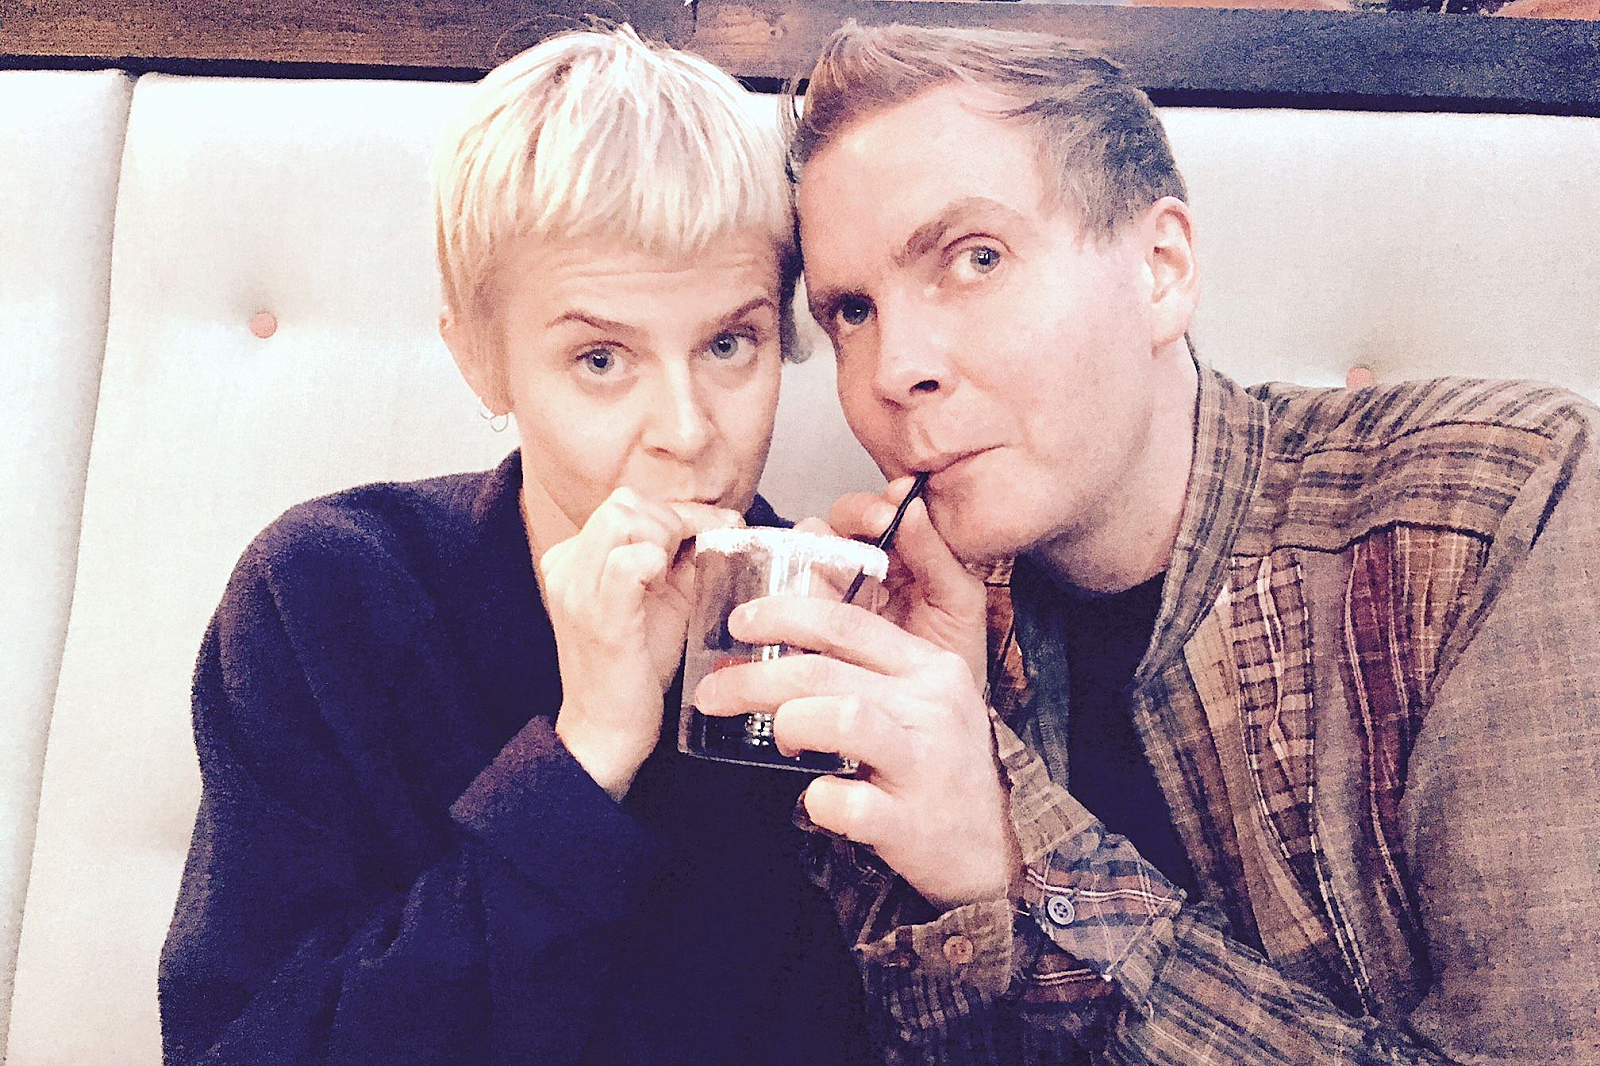 Robyn and Jónsi team up for new track 'Salt Licorice'